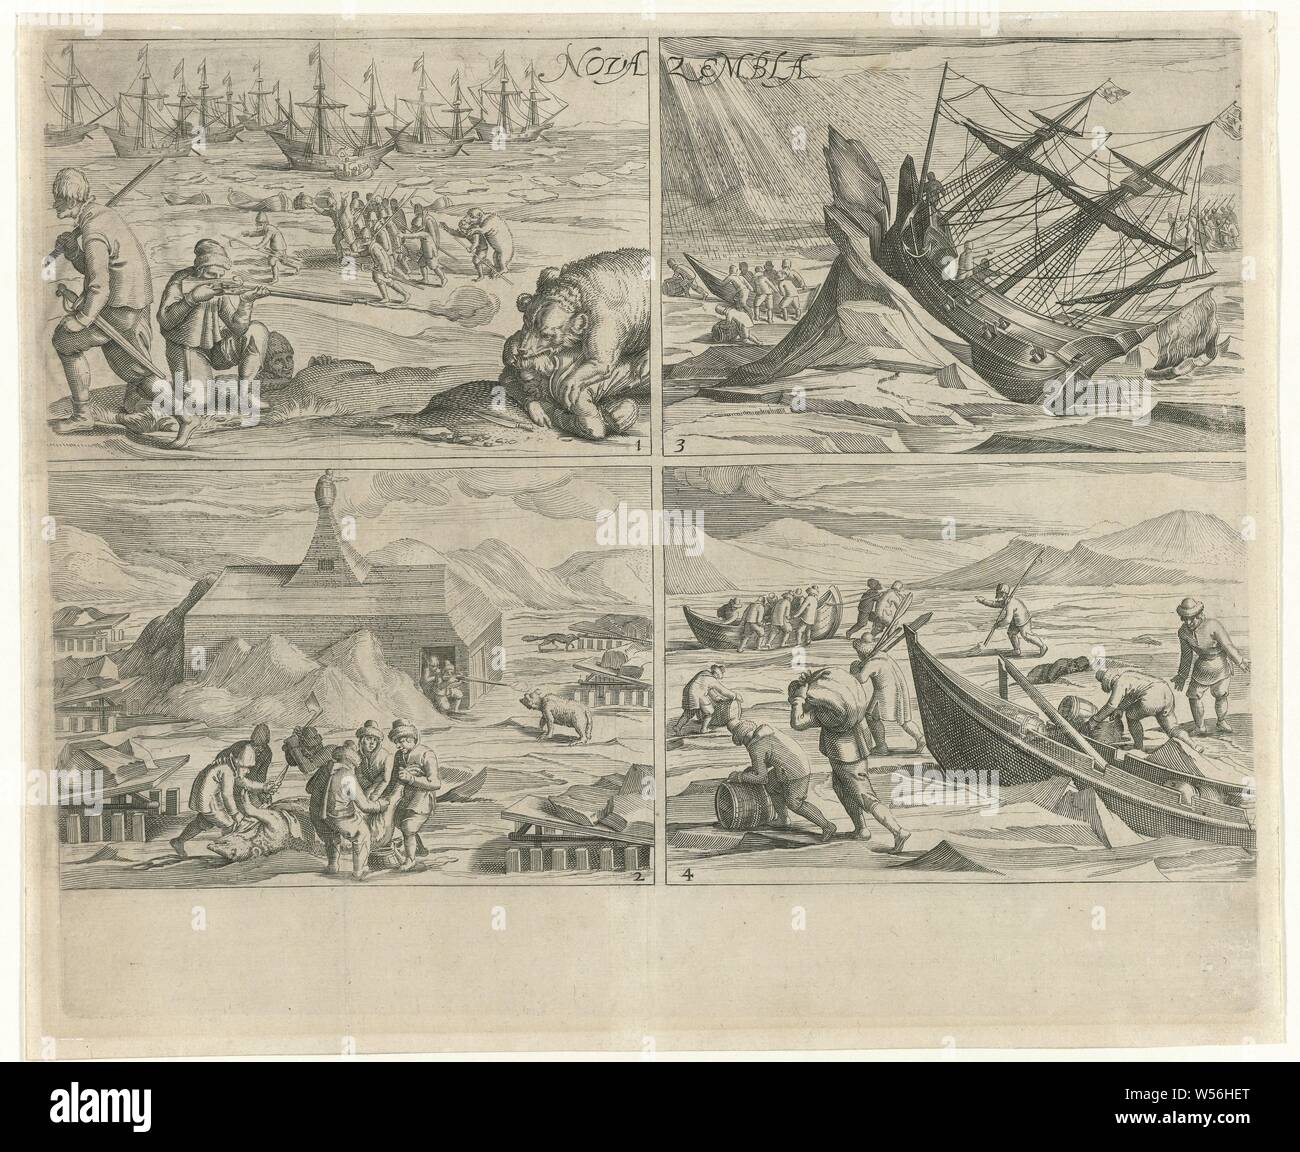 Nova Zembla, Sheet with four copies after the original illustrations in the travelogue of the journey of Willem Barendsz and Jacob van Heemskerck in 1596-1597 and the stay on the island of Nova Zembla. Numbered 1 to 4. Top left (1): Shooting of the polar bear that had attacked two sailors, September 6, 1595. In the background the ships off the coast. Bottom left (2): Shooting and skinning of a polar bear at the Behouden Huys, 12 February 1597. Top right (3): The ship jammed and lifted by the ice, 27 August - 1 September 1596. The crew brings the sloop and provisions to shore.. Bottom right (4 Stock Photo